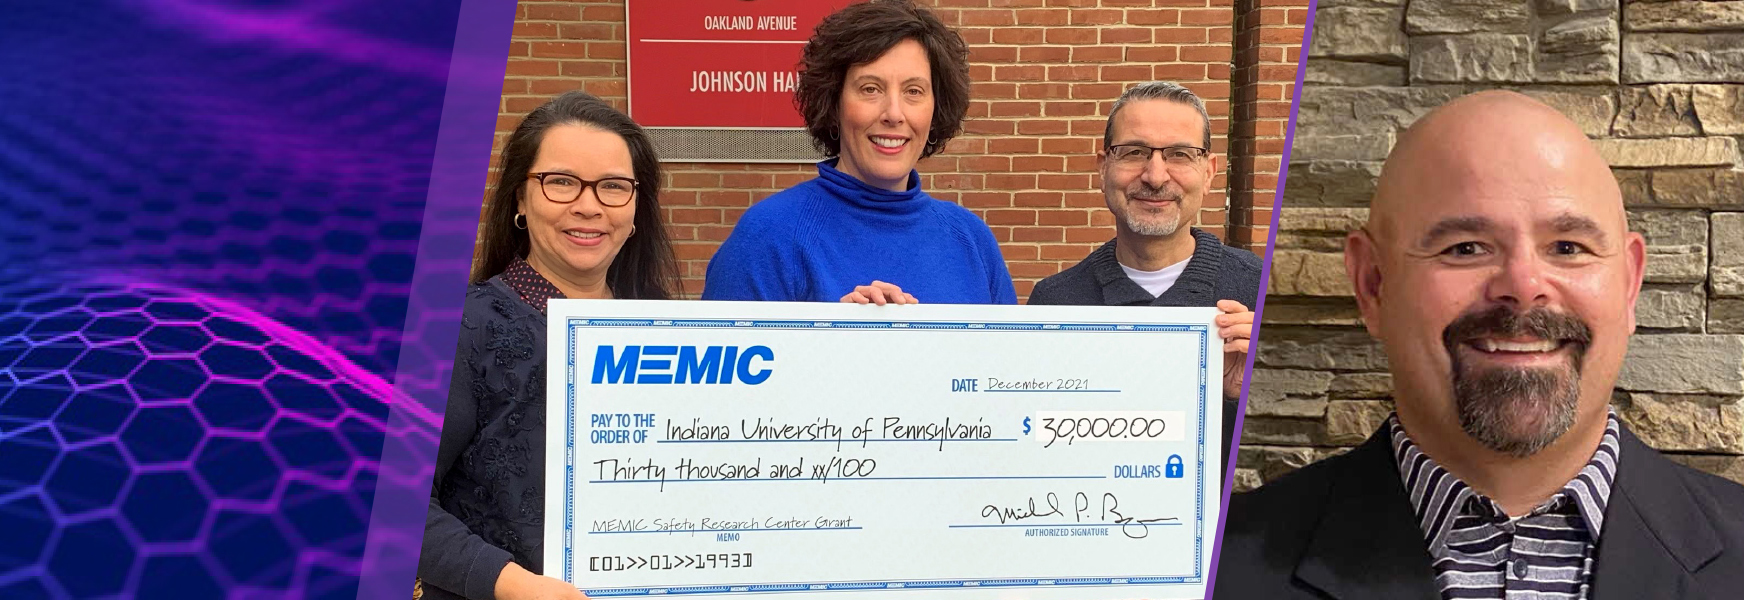 Safety Research Center Grant winners hold large check for $30,000